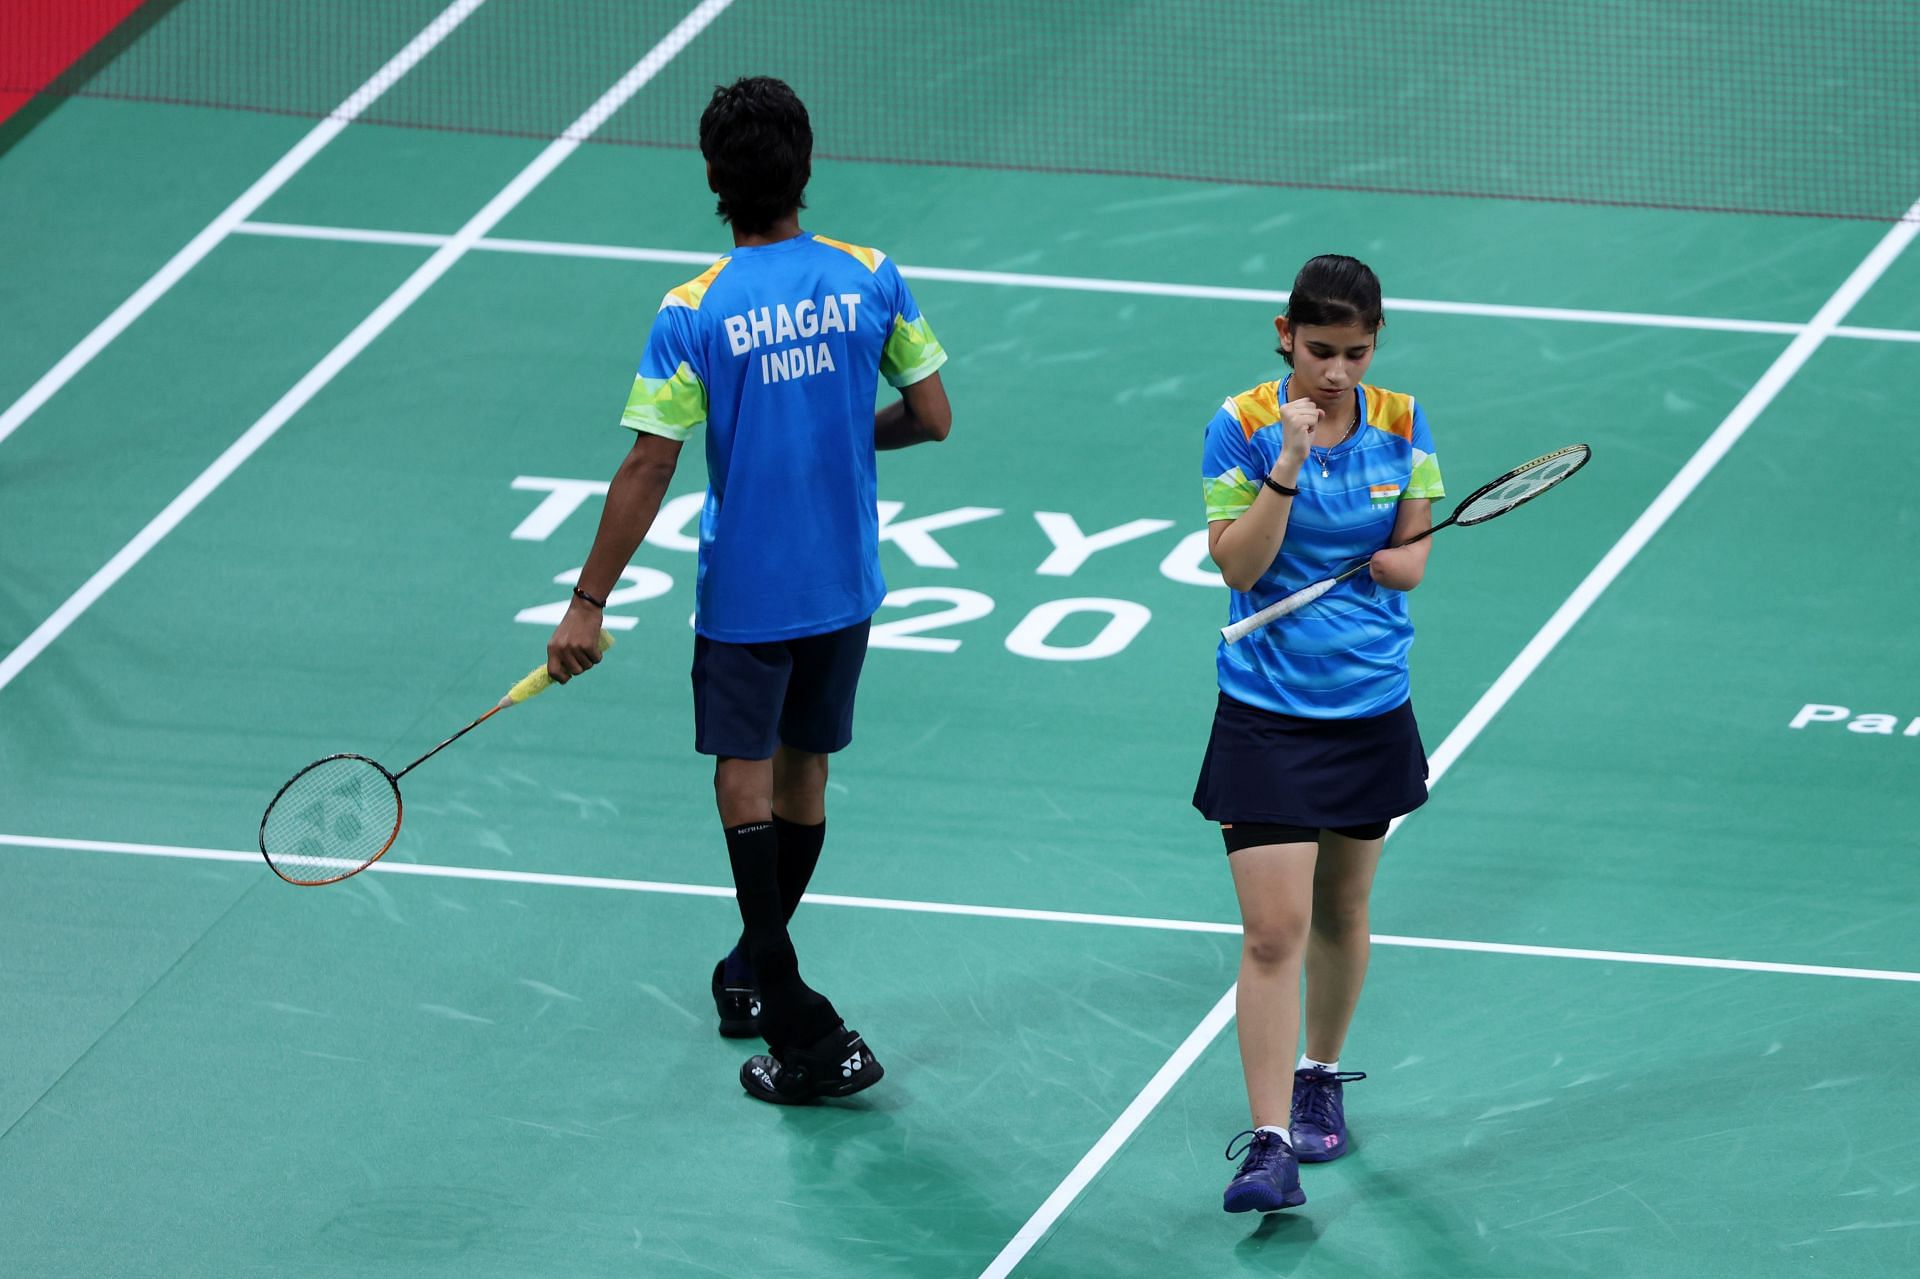 Palak Kohli (right) with Pramod Bhagat at the Tokyo Paralympics. (PC: Getty Images)